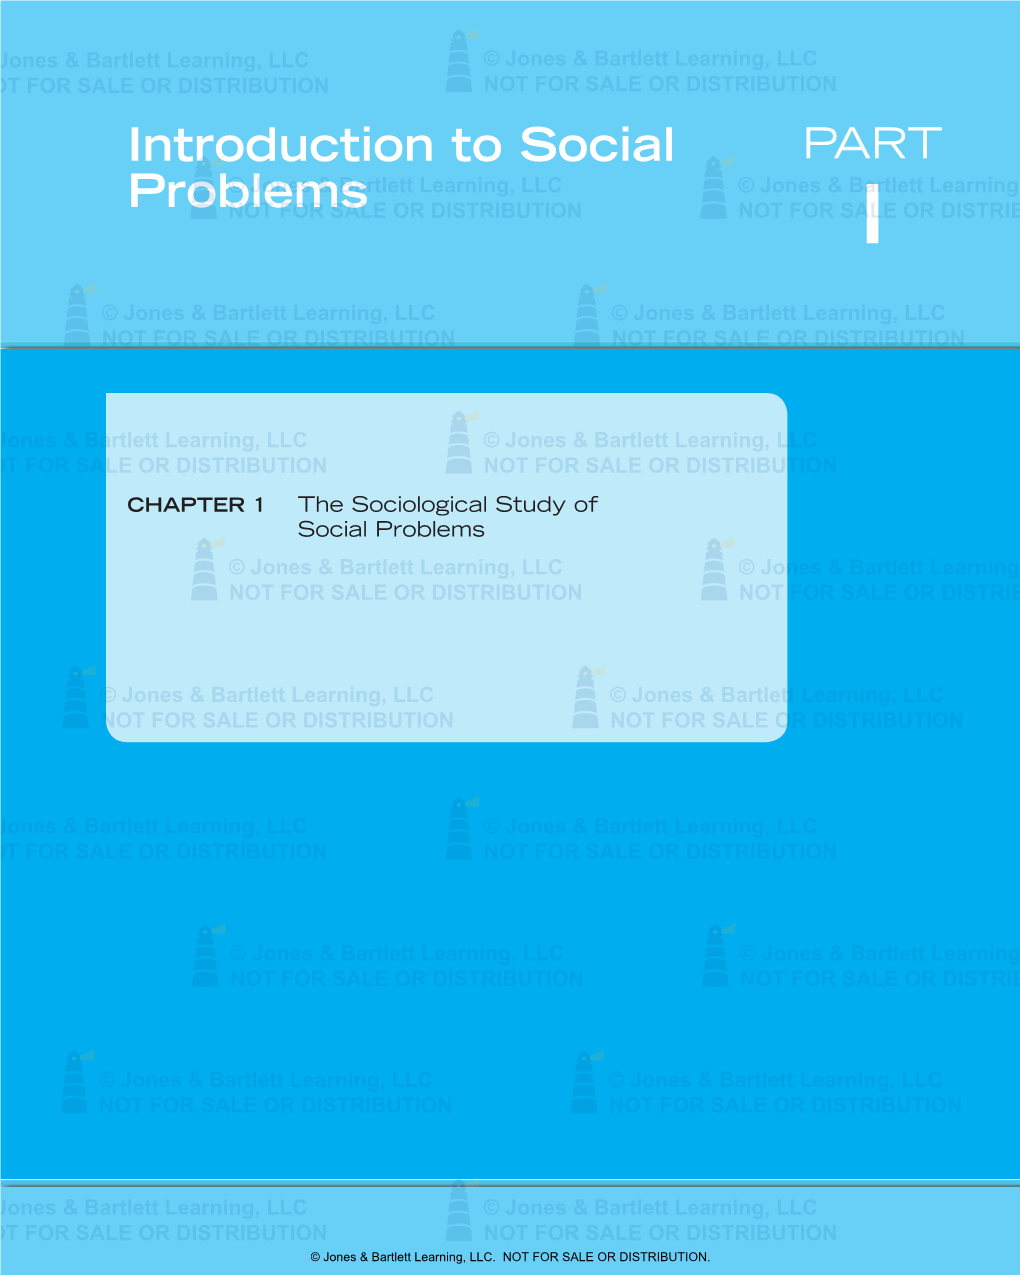 CHAPTER 1 the Sociological Study of Social Problems